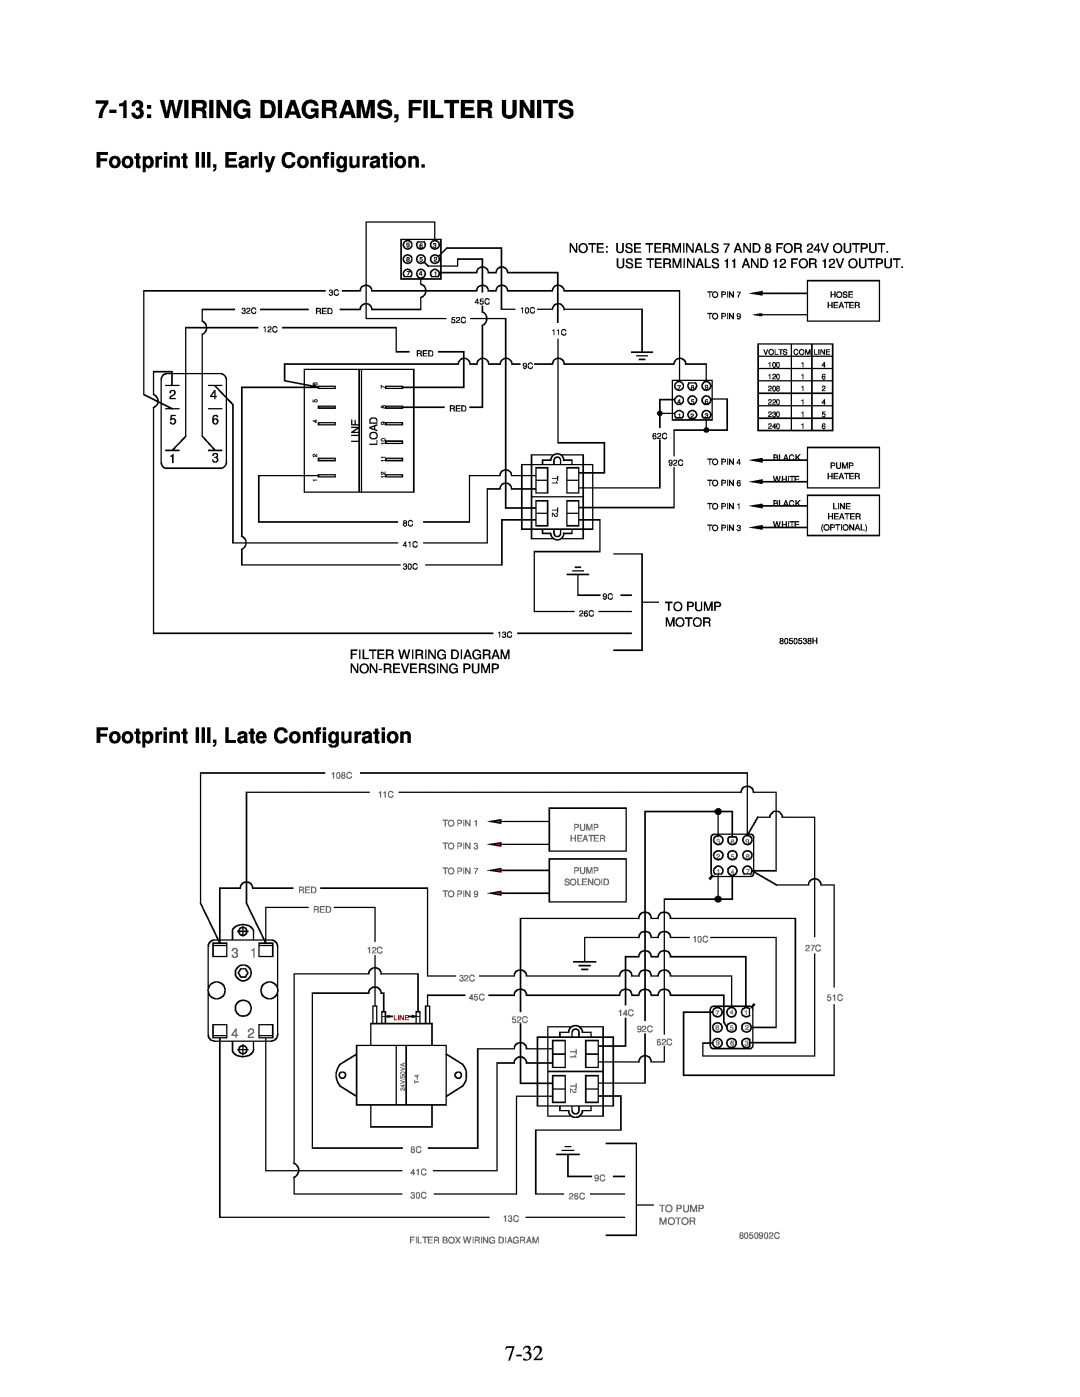 Frymaster H14 Series Wiring Diagrams, Filter Units, Footprint III, Early Configuration, Footprint III, Late Configuration 